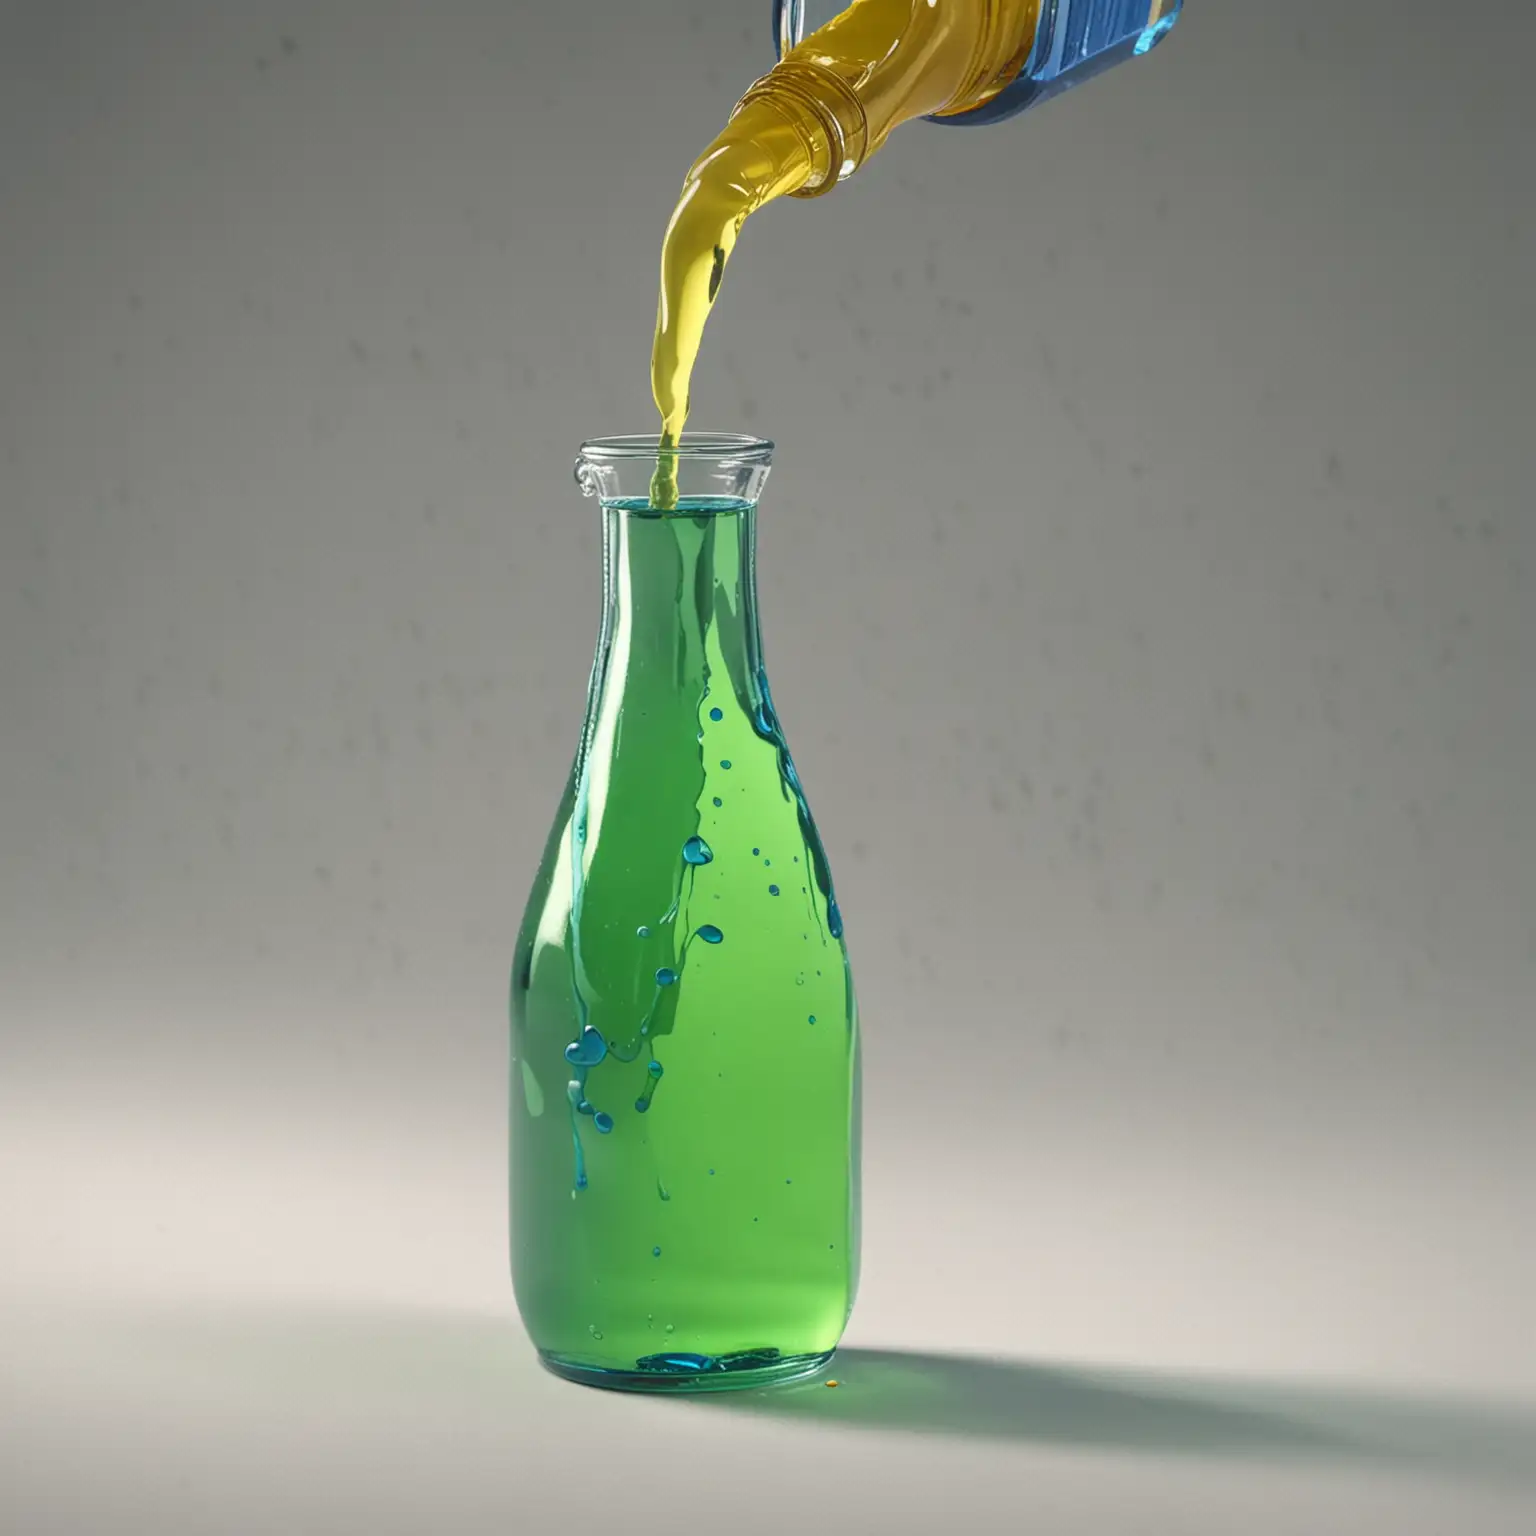 create an annimation showing a botle of blue liquid and a bottle of yellow liquid being poured into a bottle to form a green liquid